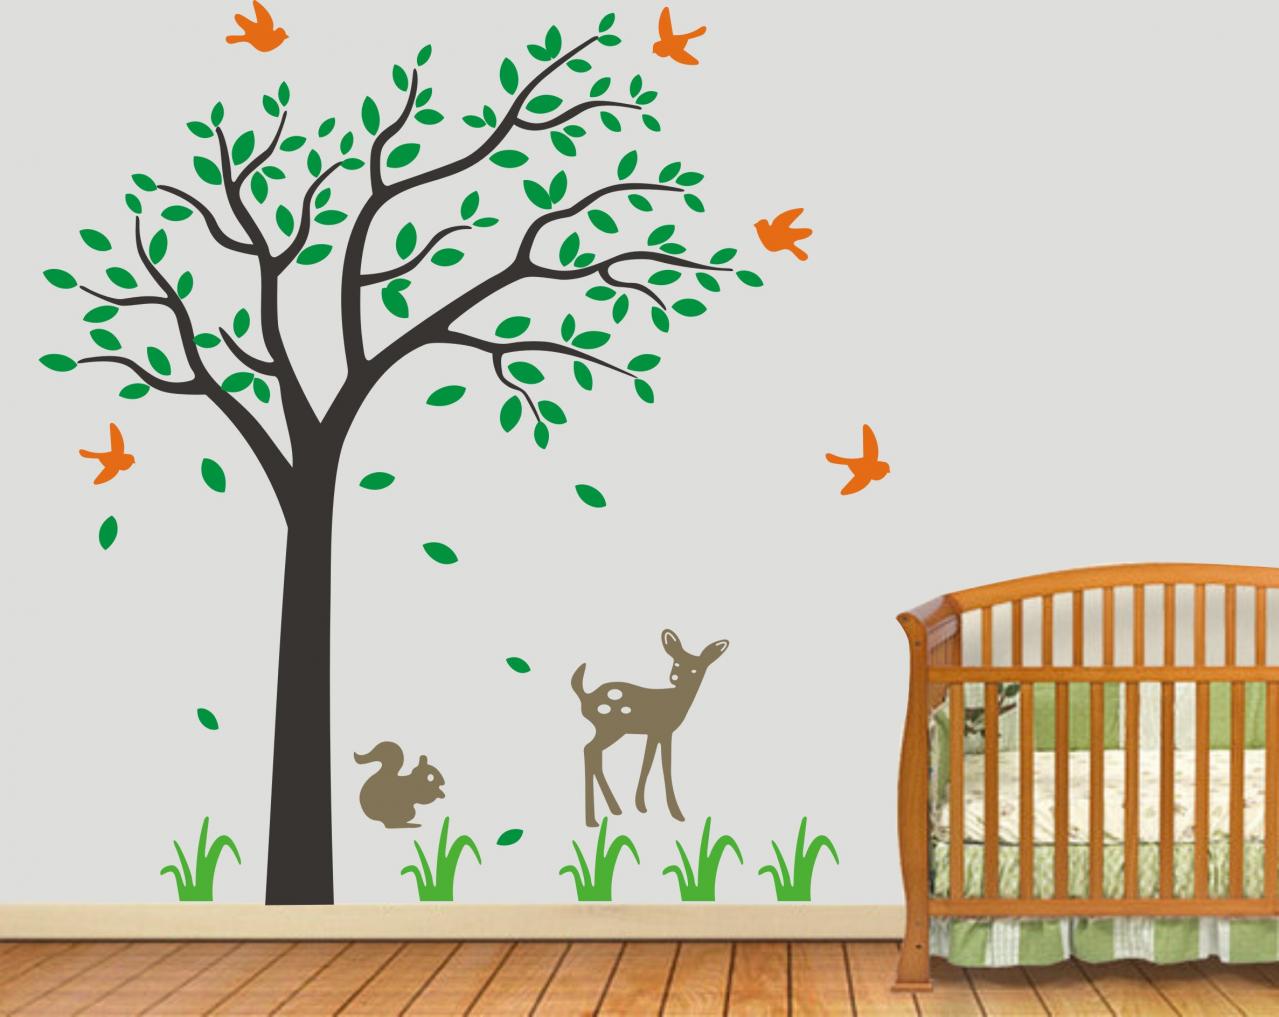 Wall Decal Cute Deer Squirrel Tree With Birds Leaf Grass Nursery Vinyl Home Art Decals Wall Sticker Stickers Kids Room Bed Baby Kid H562